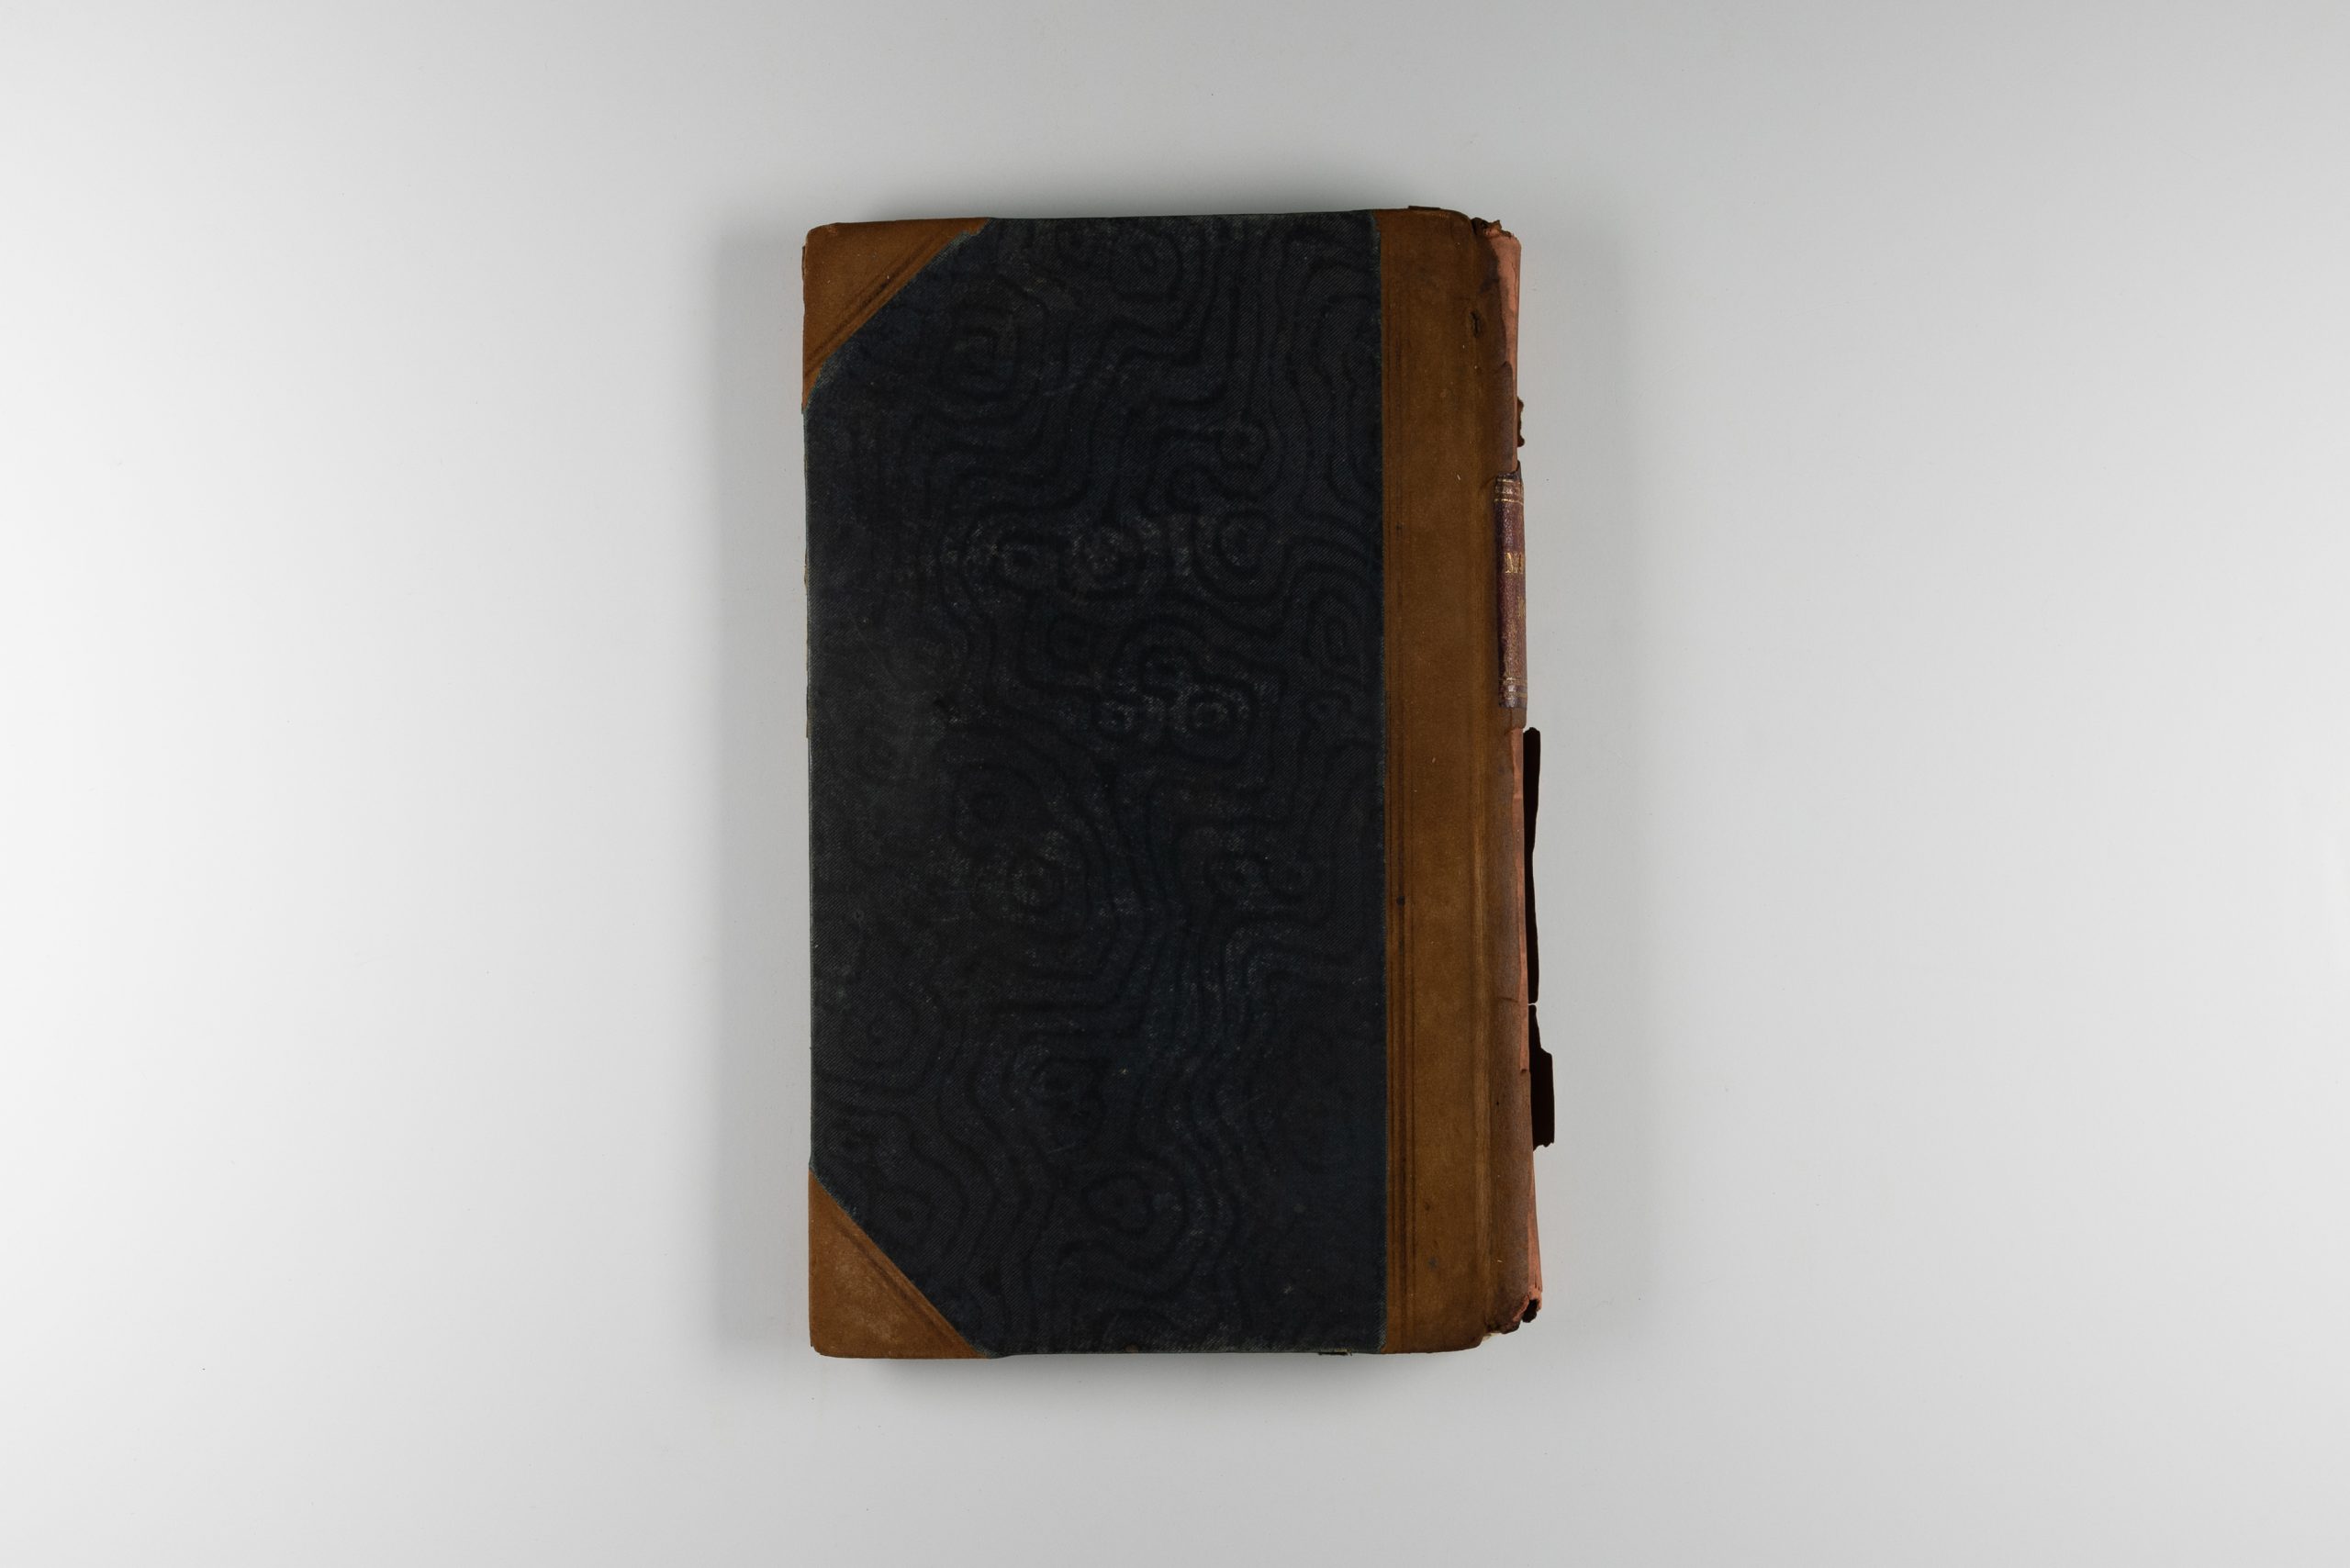 Back cover of a book, the cover is black with brown leather strips on the spine and corners.